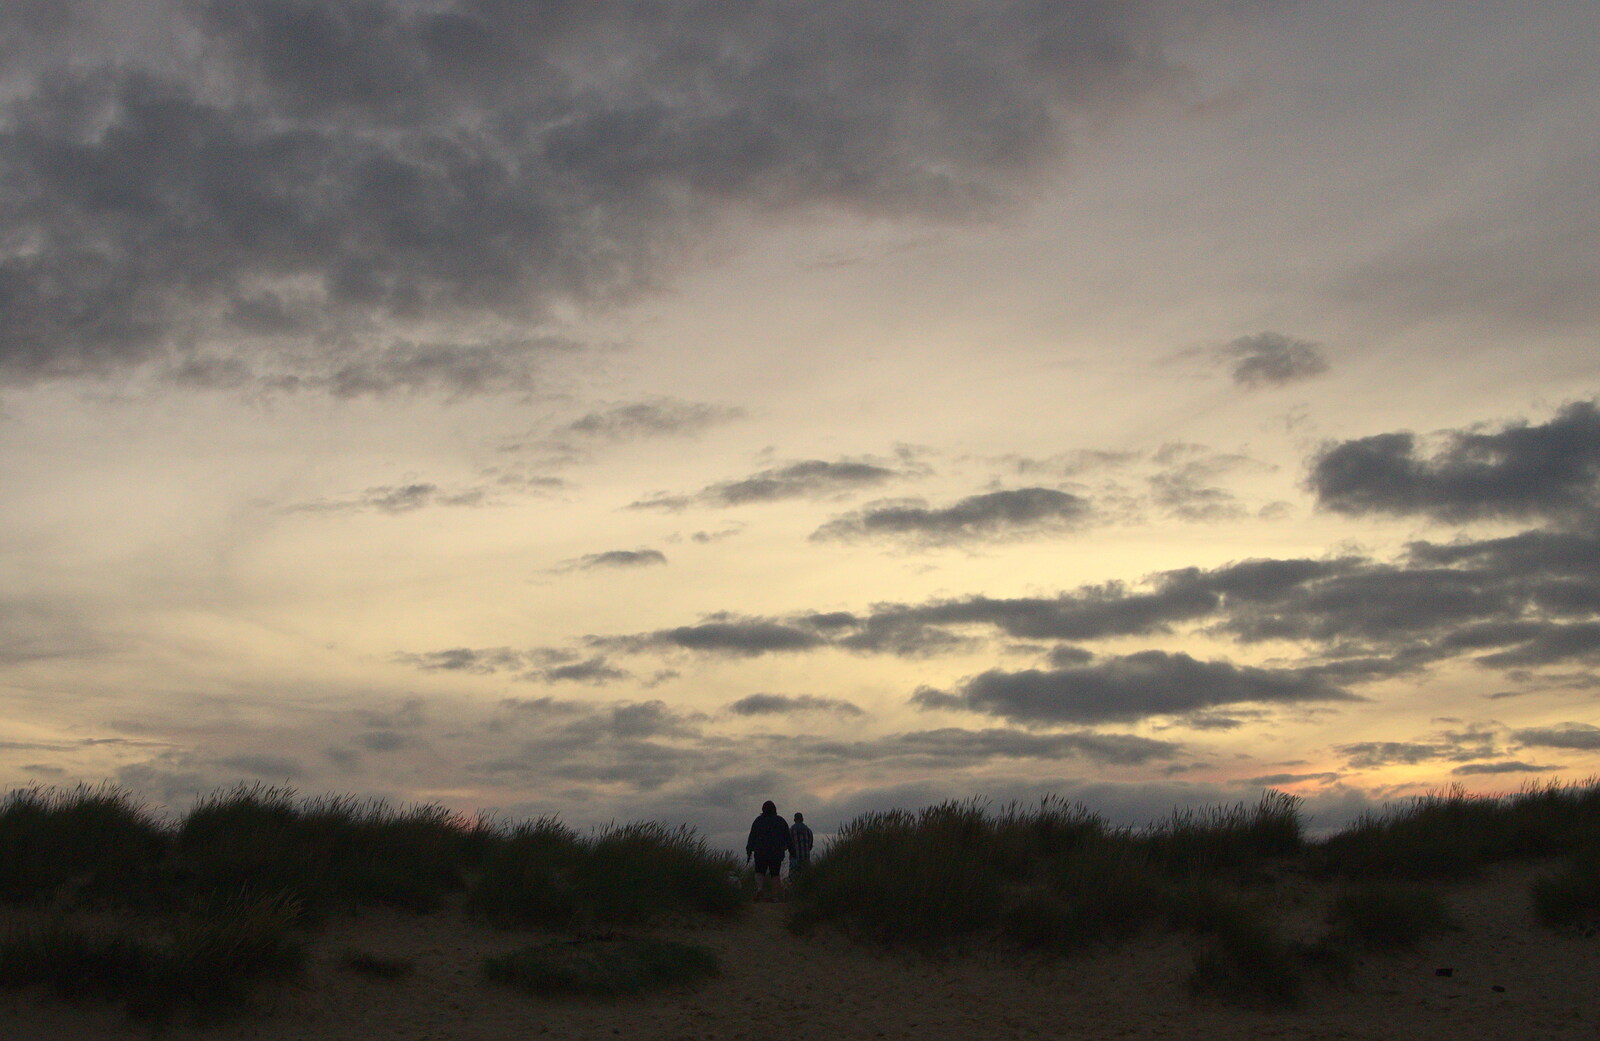 An evening walk on the beach from The Danger of Trees: A Camping (Mis)adventure - Southwold, Suffolk - 3rd August 2015